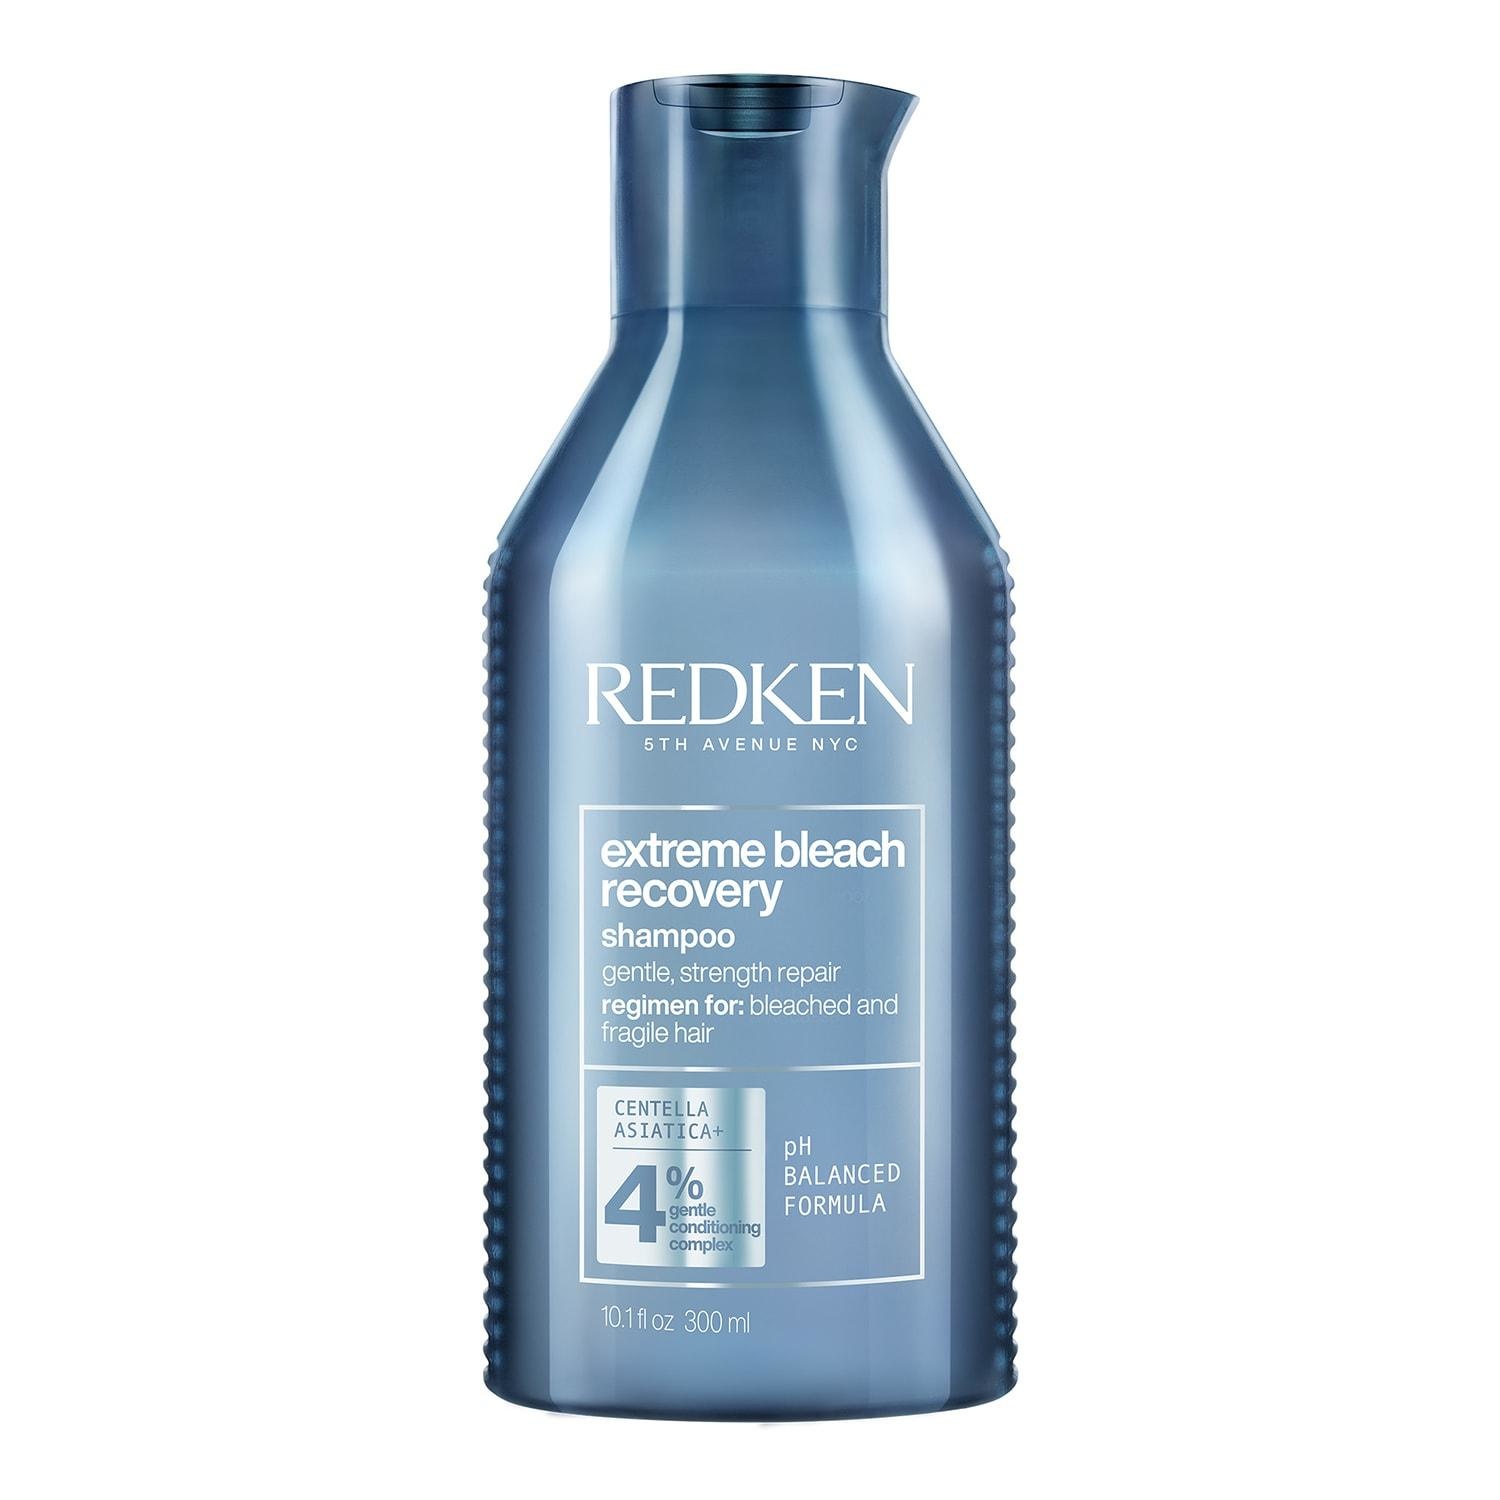 Redken Extreme Bleach Recovery Shampoo 300ml - Normale shampoo vrouwen - Voor Alle haartypes